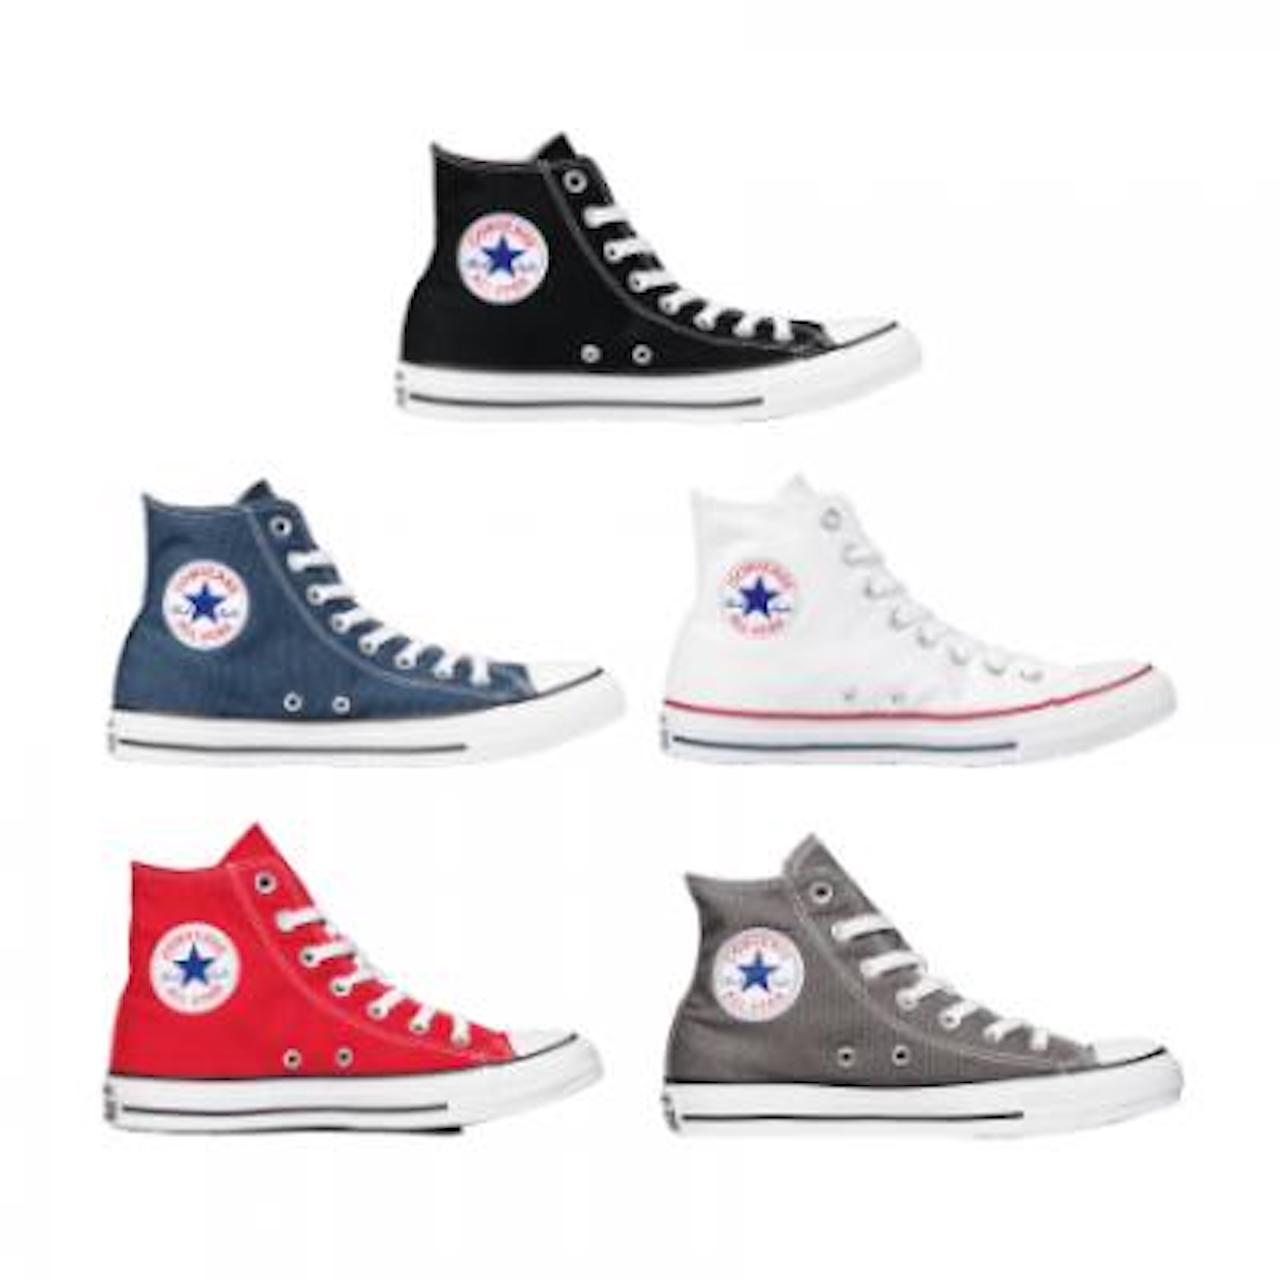 converse all star wholesale